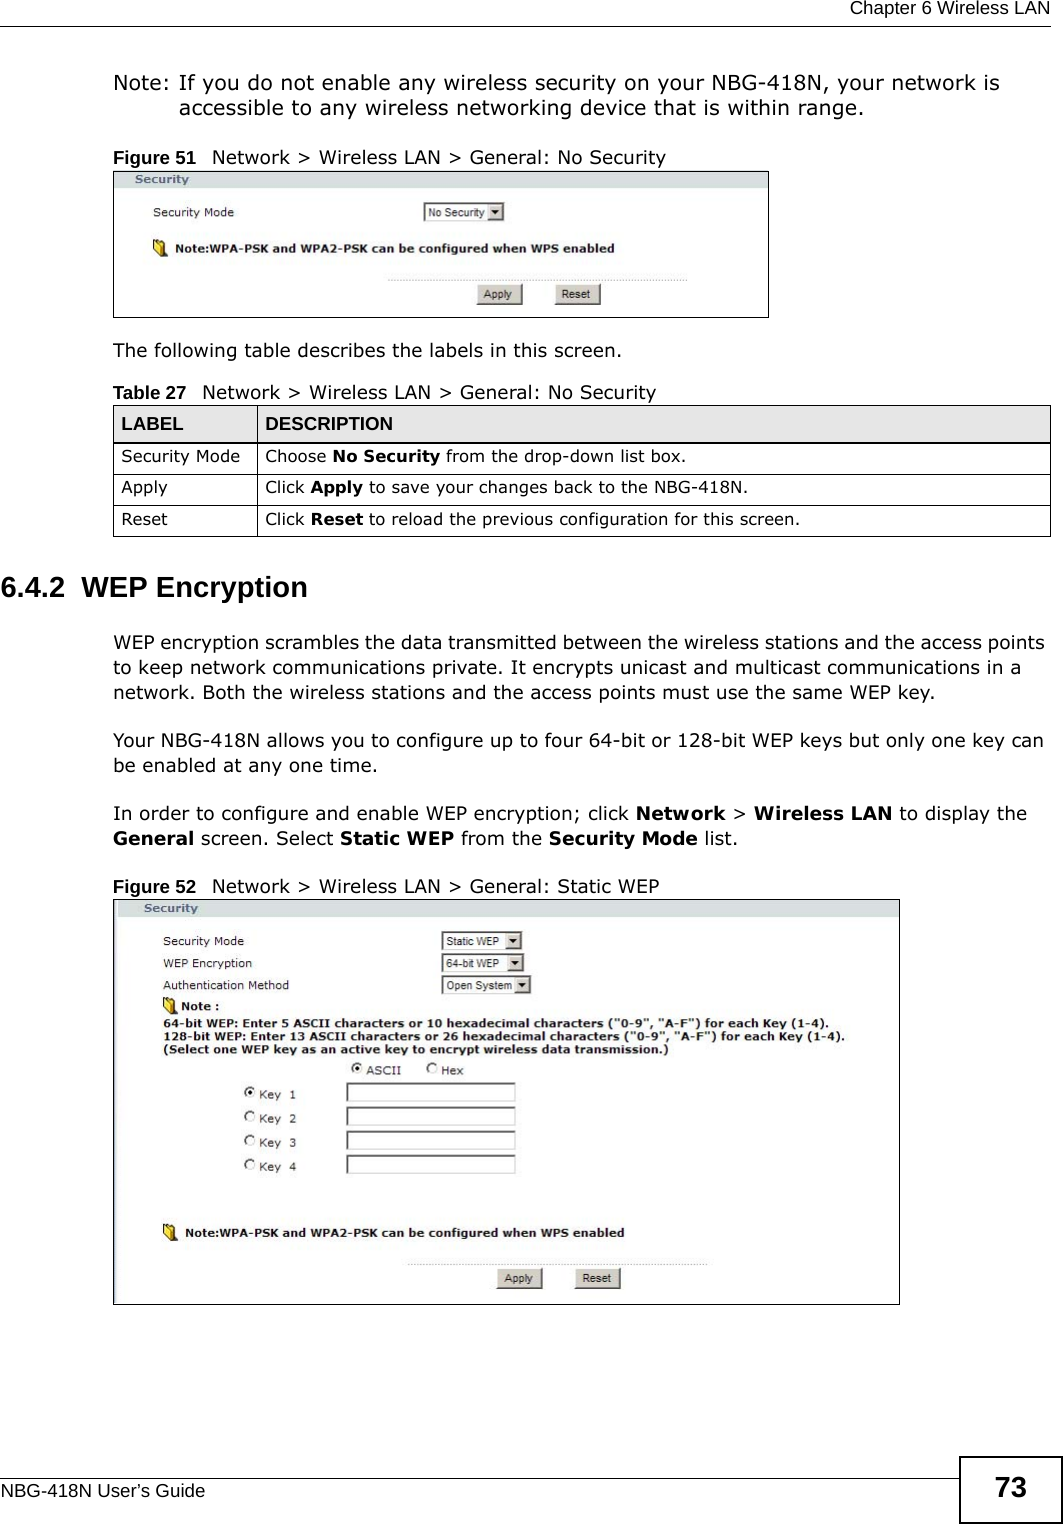  Chapter 6 Wireless LANNBG-418N User’s Guide 73Note: If you do not enable any wireless security on your NBG-418N, your network is accessible to any wireless networking device that is within range.Figure 51   Network &gt; Wireless LAN &gt; General: No SecurityThe following table describes the labels in this screen.6.4.2  WEP EncryptionWEP encryption scrambles the data transmitted between the wireless stations and the access points to keep network communications private. It encrypts unicast and multicast communications in a network. Both the wireless stations and the access points must use the same WEP key.Your NBG-418N allows you to configure up to four 64-bit or 128-bit WEP keys but only one key can be enabled at any one time.In order to configure and enable WEP encryption; click Network &gt; Wireless LAN to display the General screen. Select Static WEP from the Security Mode list.Figure 52   Network &gt; Wireless LAN &gt; General: Static WEPTable 27   Network &gt; Wireless LAN &gt; General: No SecurityLABEL DESCRIPTIONSecurity Mode Choose No Security from the drop-down list box.Apply Click Apply to save your changes back to the NBG-418N.Reset Click Reset to reload the previous configuration for this screen.